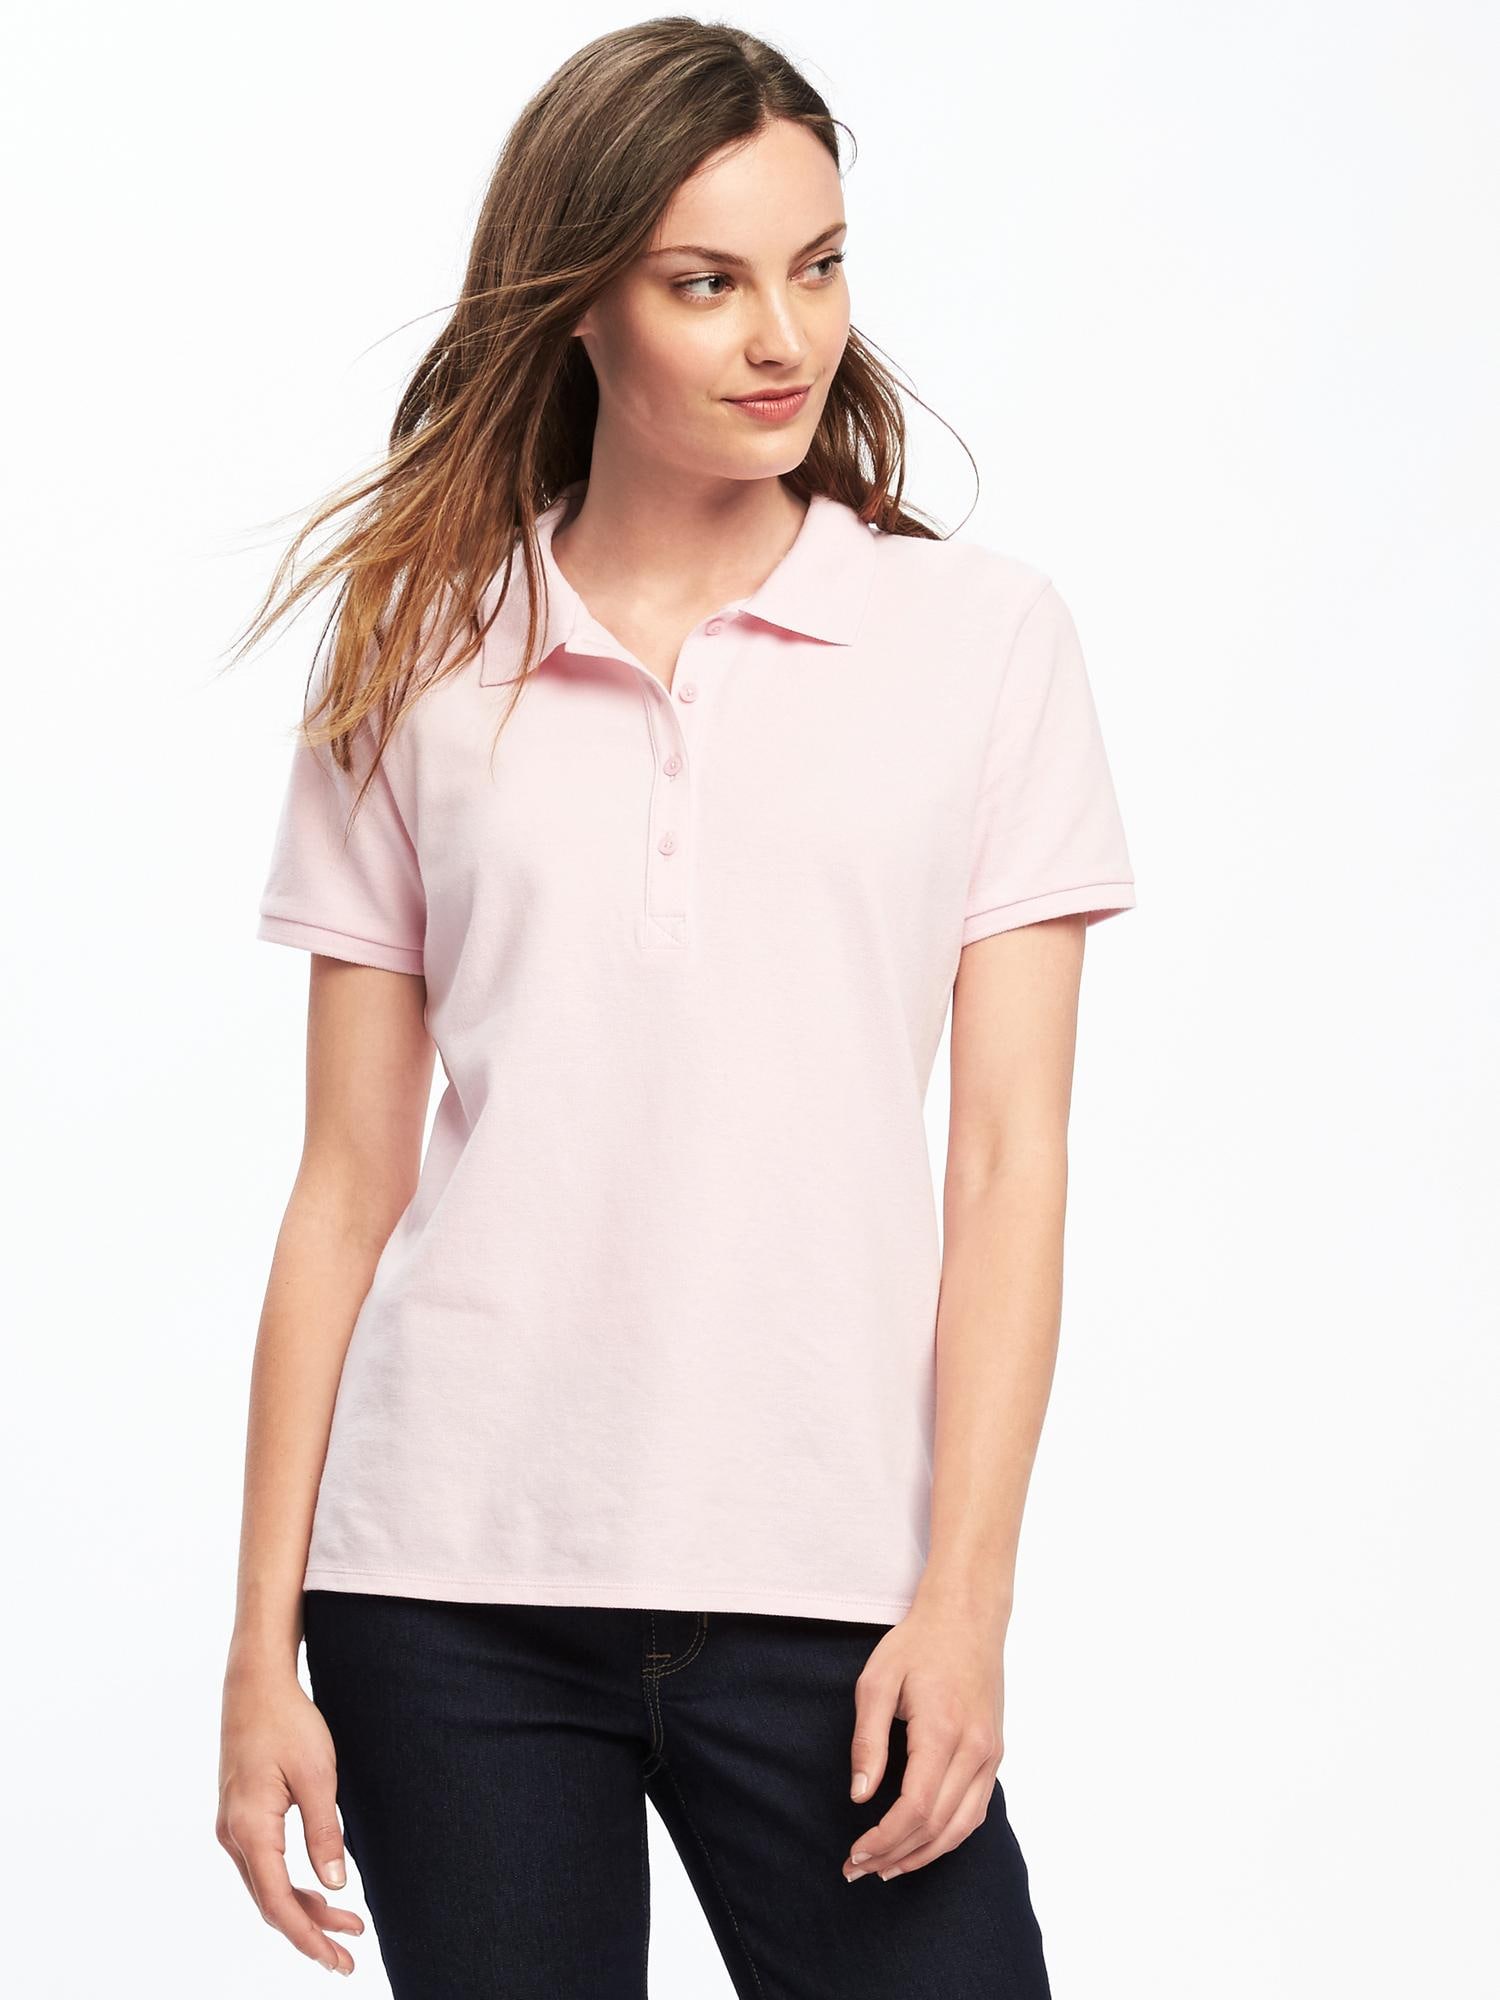 old navy womens polo shirts